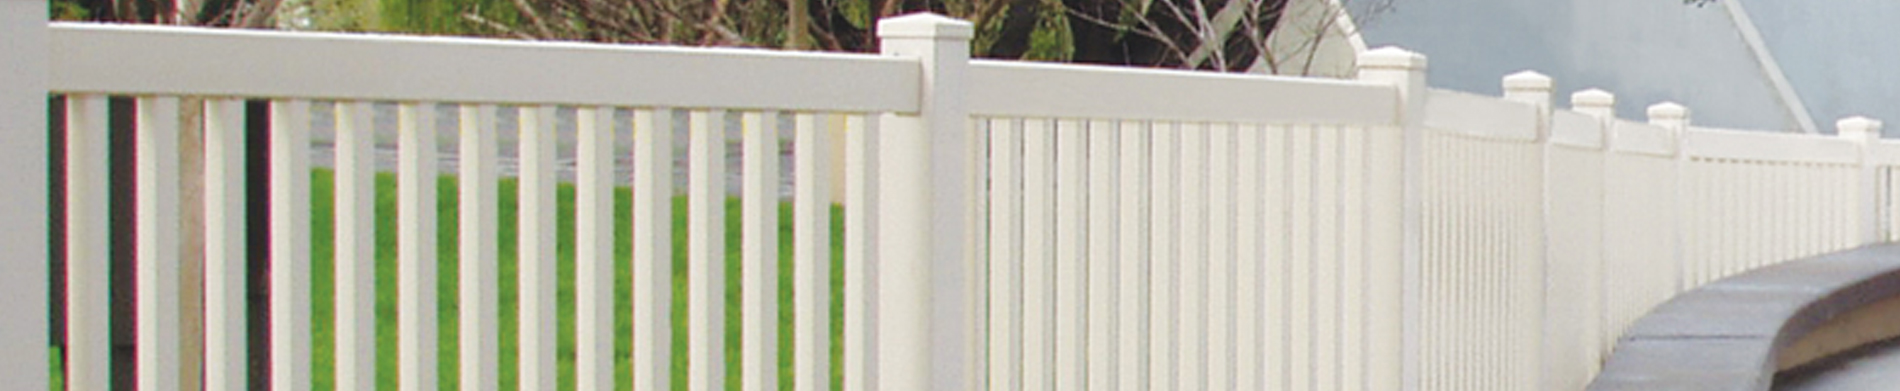 Why Are Vinyl Fences So Popular In The U.S.?